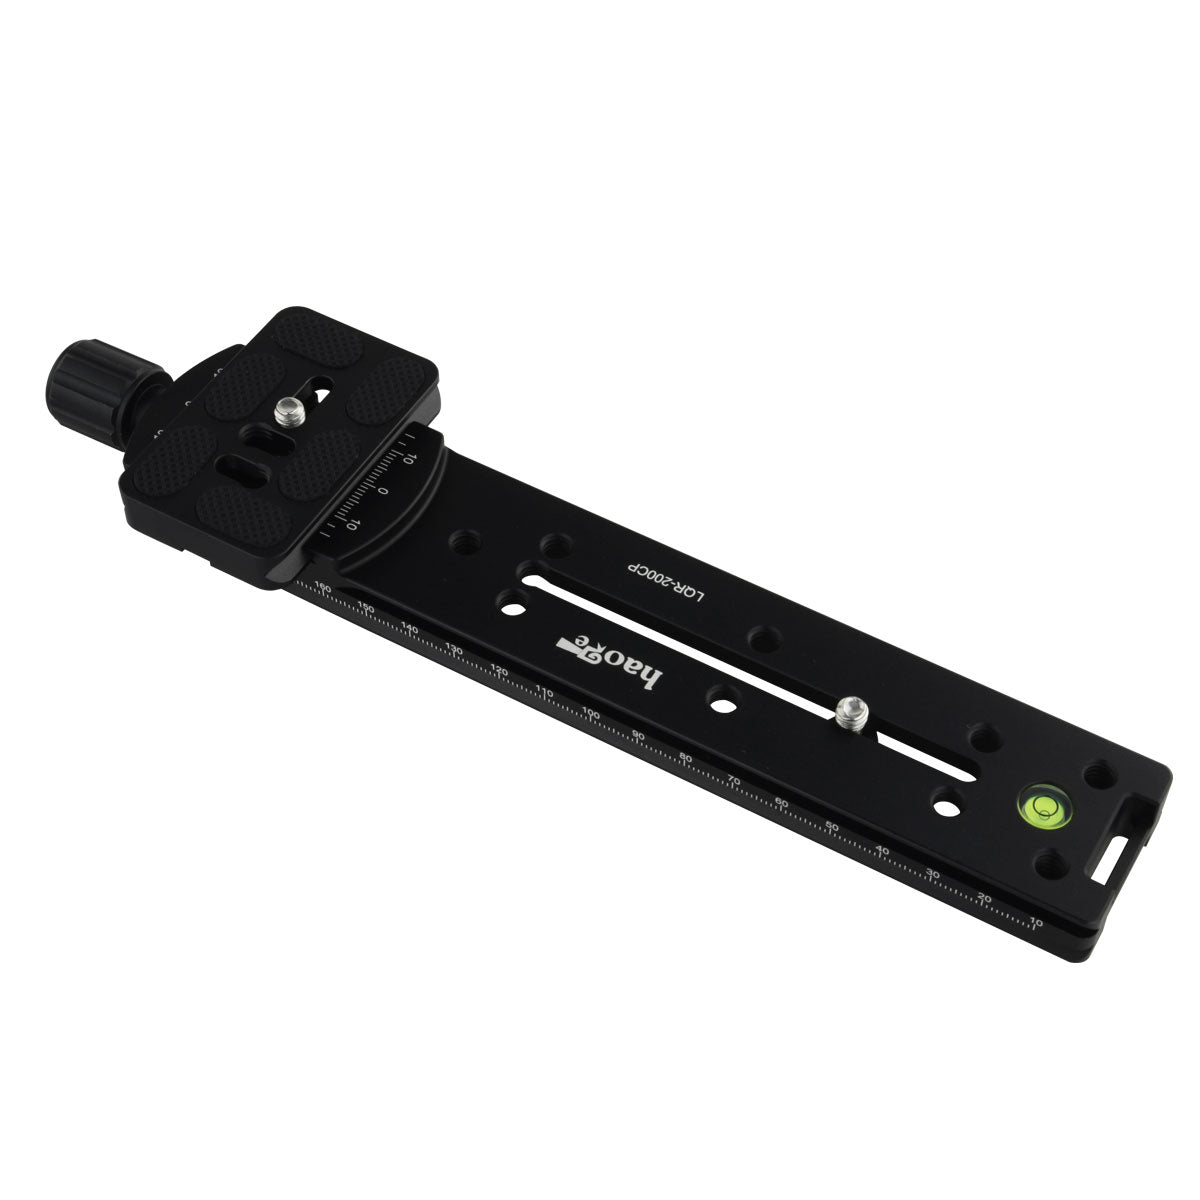 Haoge 200mm Nodal Slide Double Dovetail Focusing Rail Plate with Metal Quick Release Clamp and 60mm Plate for Camera Panoramic Panorama Close Up Macro Shoot fit Arca Swiss RRS Benro Kirk